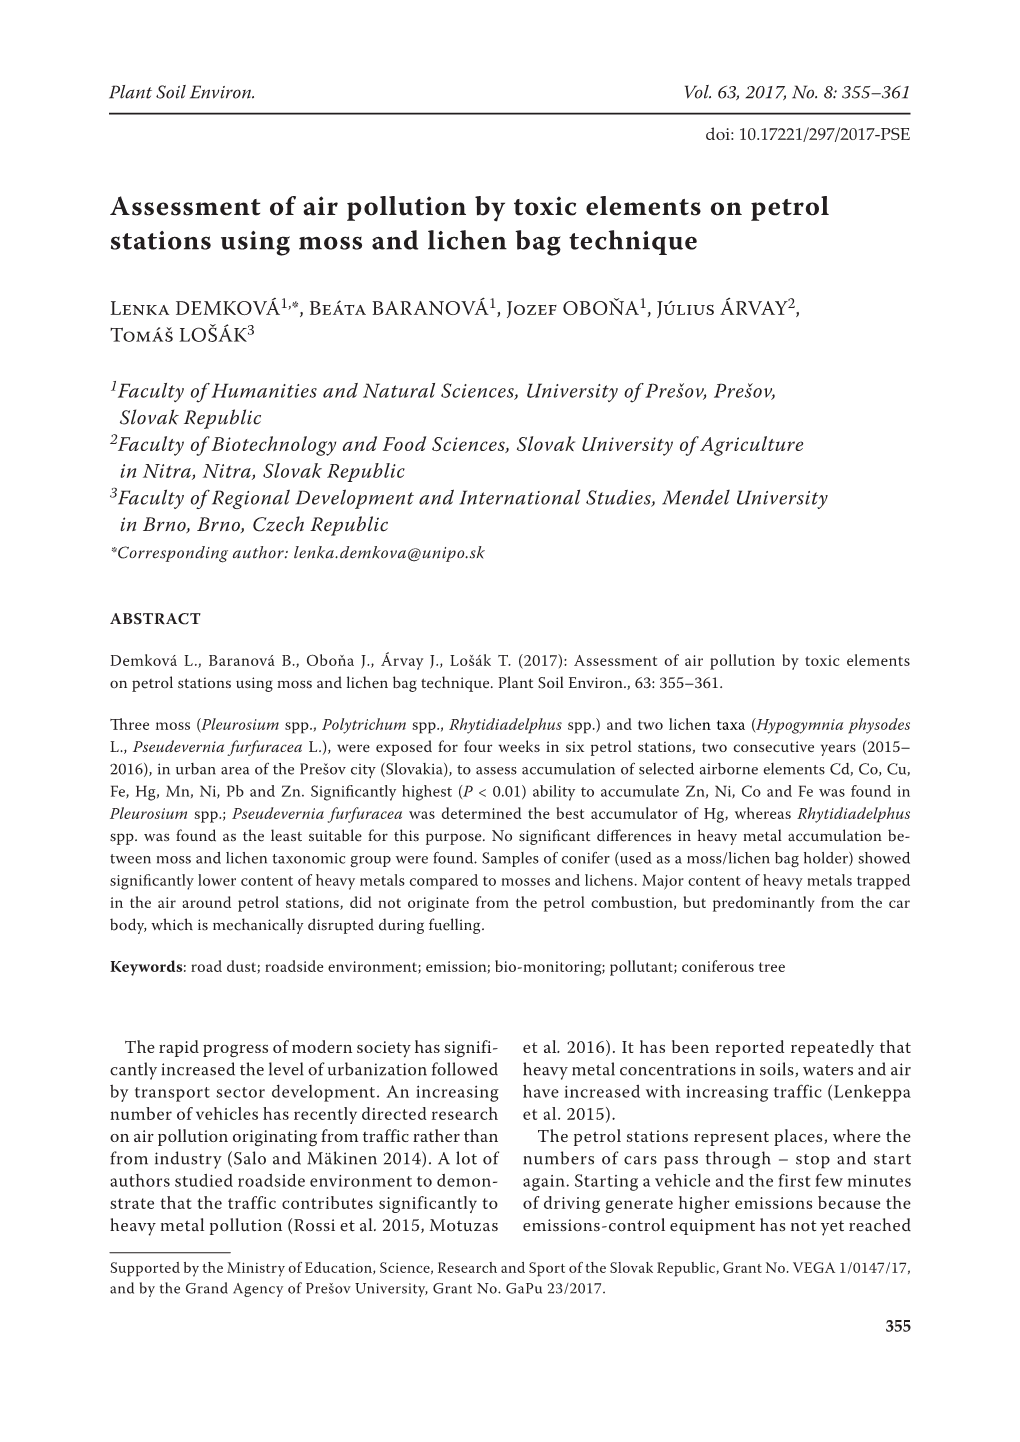 Assessment of Air Pollution by Toxic Elements on Petrol Stations Using Moss and Lichen Bag Technique